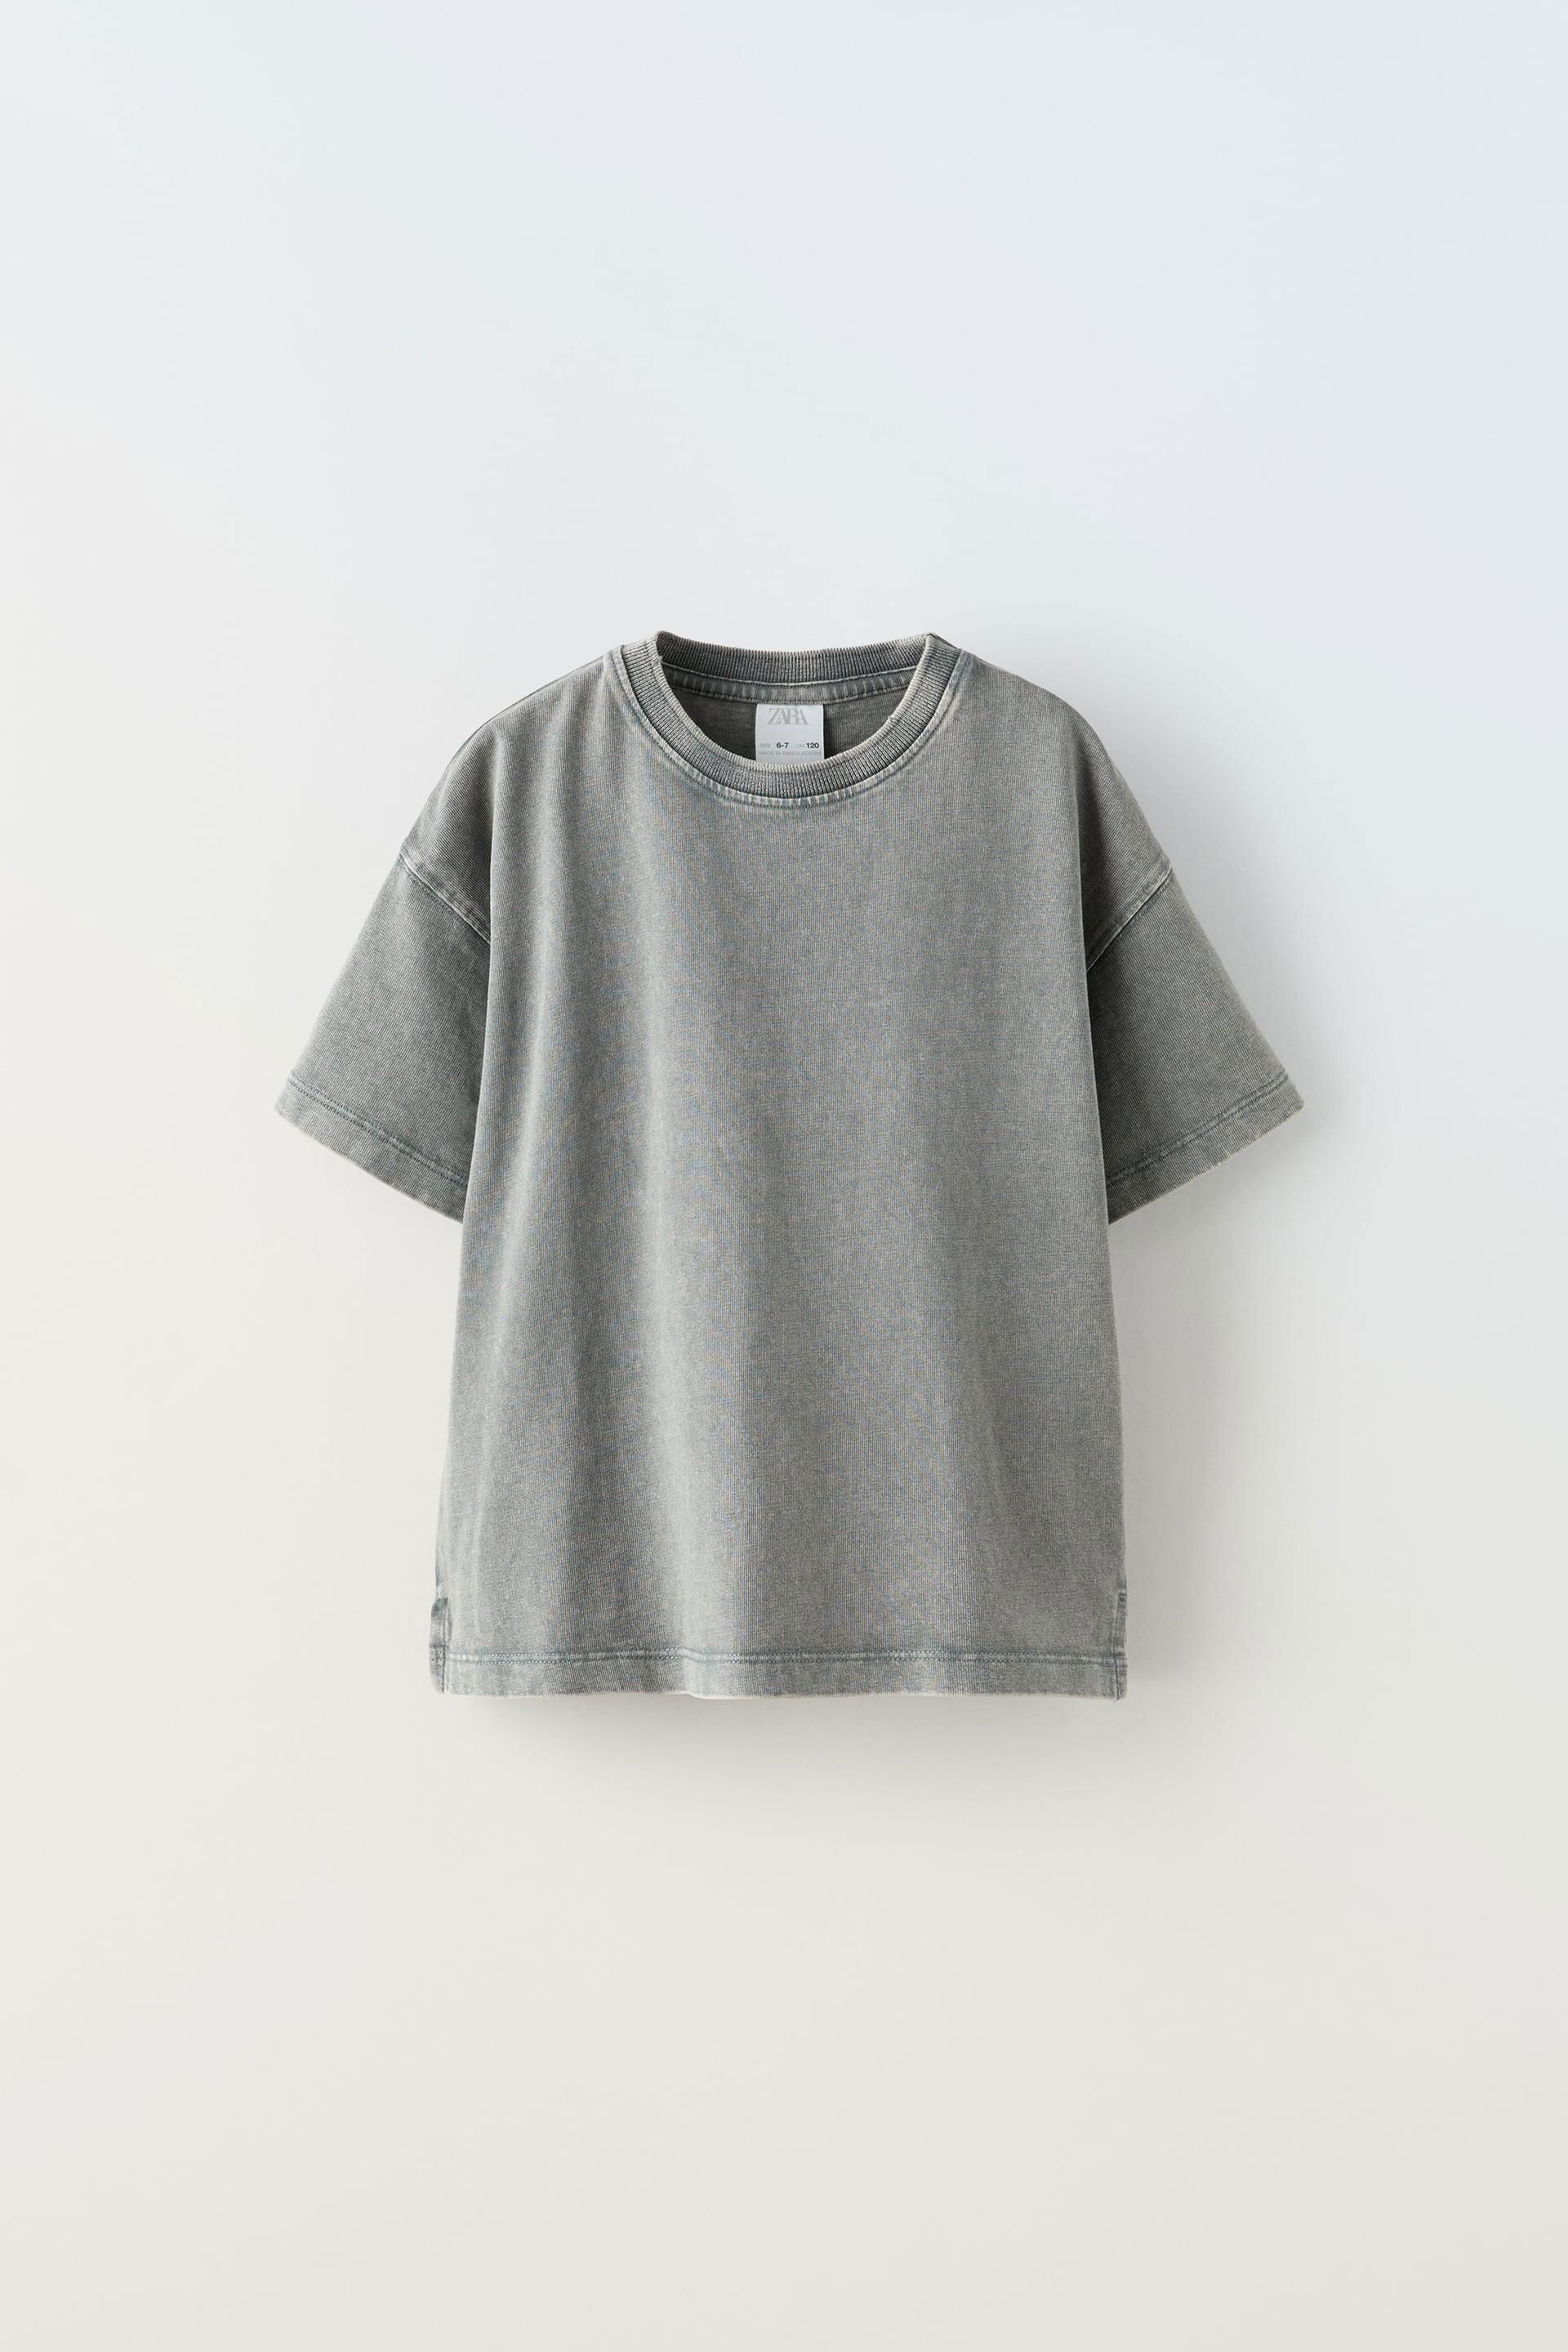 WASHED EFFECT HEAVY WEIGHT T-SHIRT by ZARA